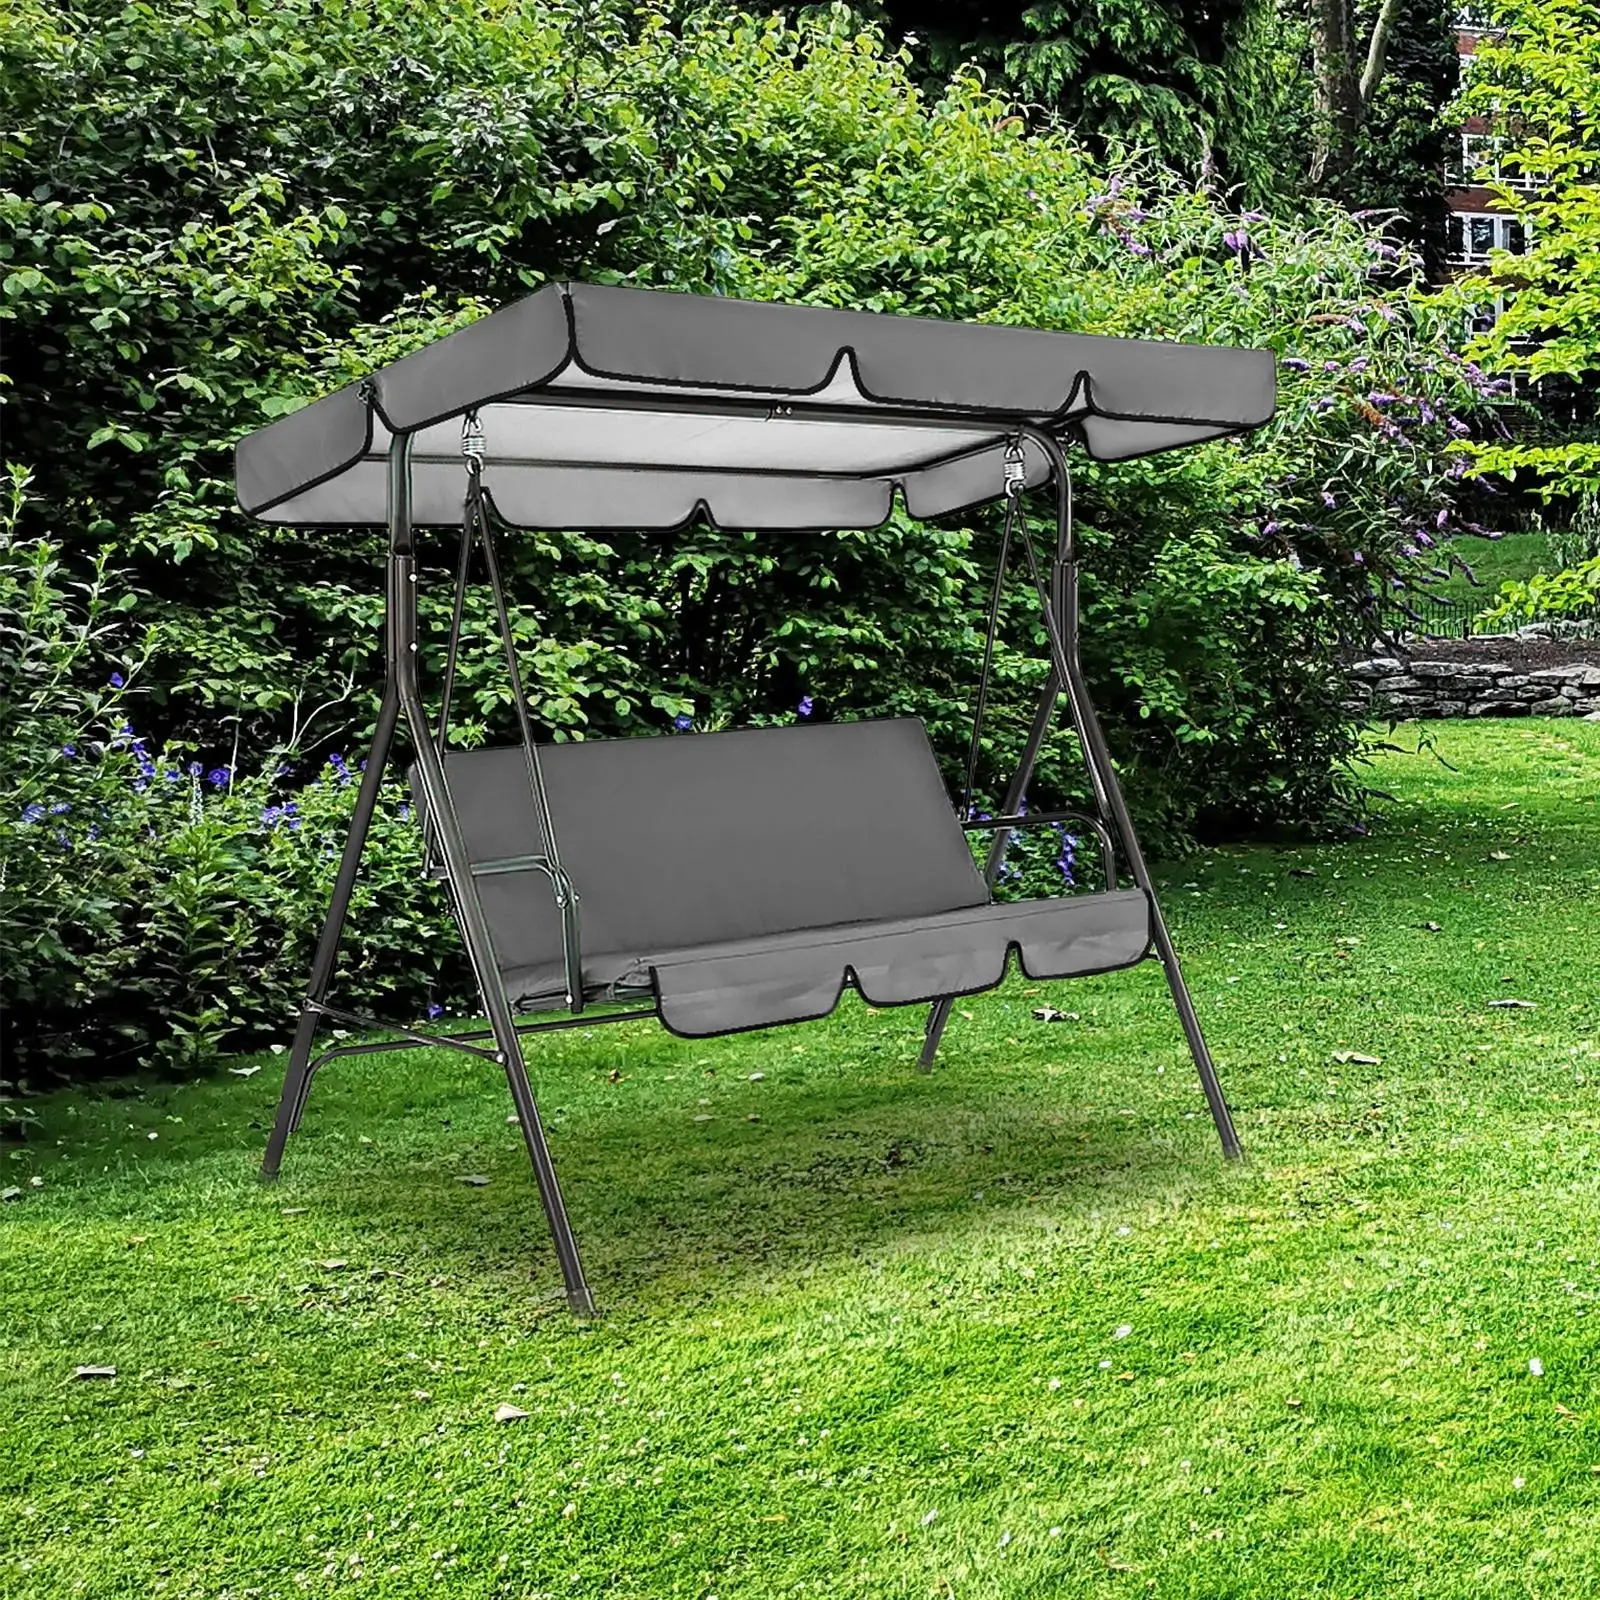 Patio Swing Canopy Replacement Windproof Rainproof Garden Swing Chair Cover Outdoor Garden Furniture Covers for Swing Furniture